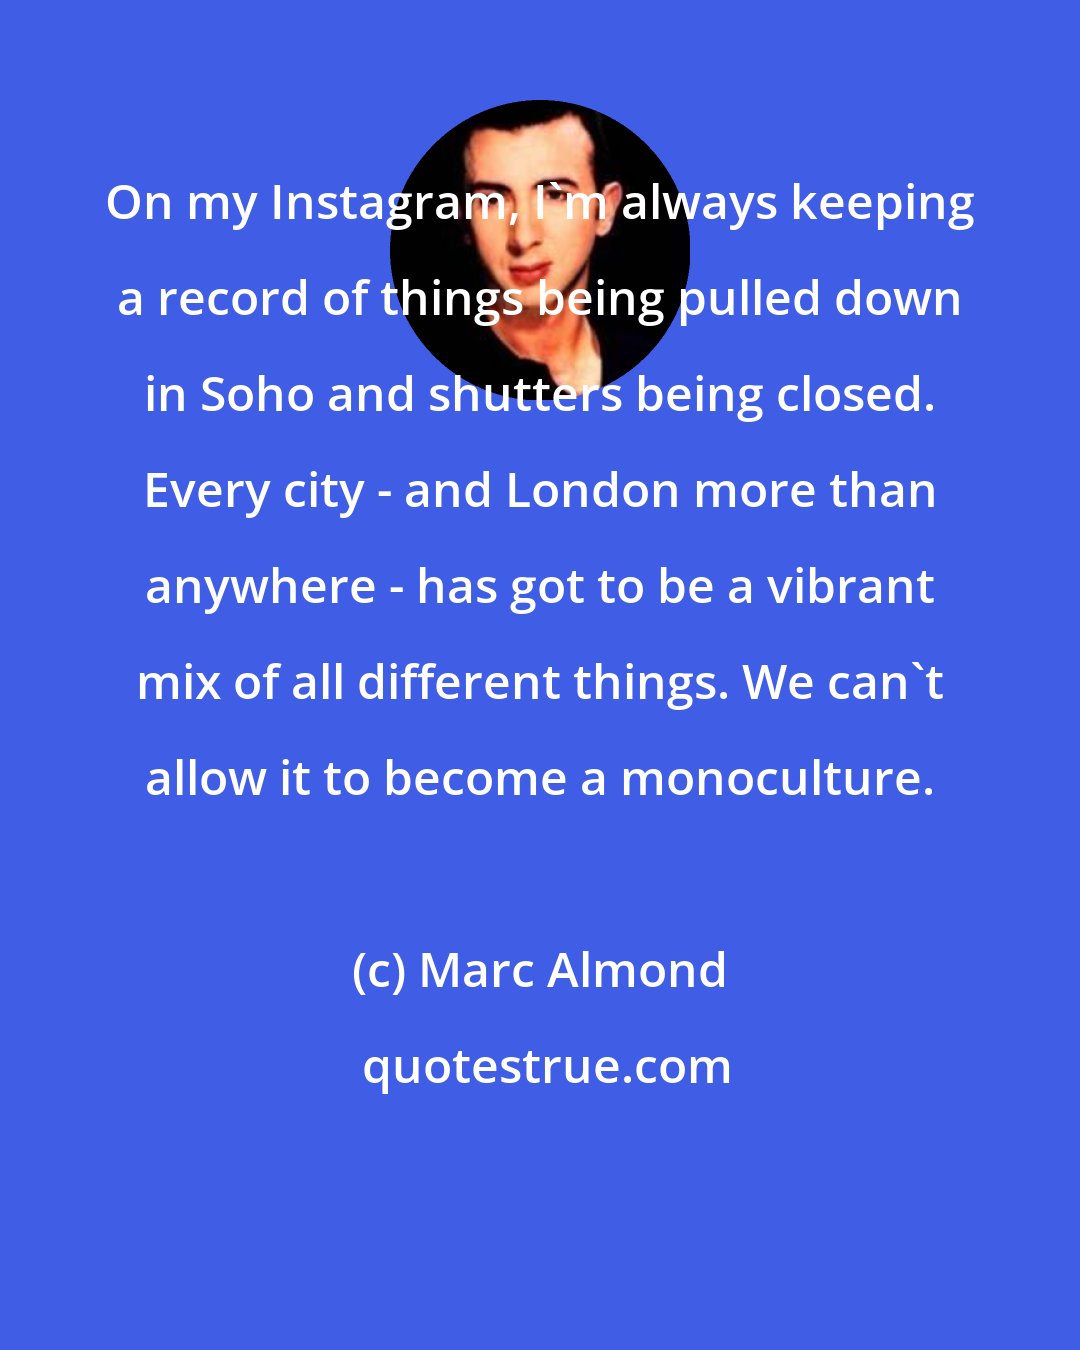 Marc Almond: On my Instagram, I'm always keeping a record of things being pulled down in Soho and shutters being closed. Every city - and London more than anywhere - has got to be a vibrant mix of all different things. We can't allow it to become a monoculture.